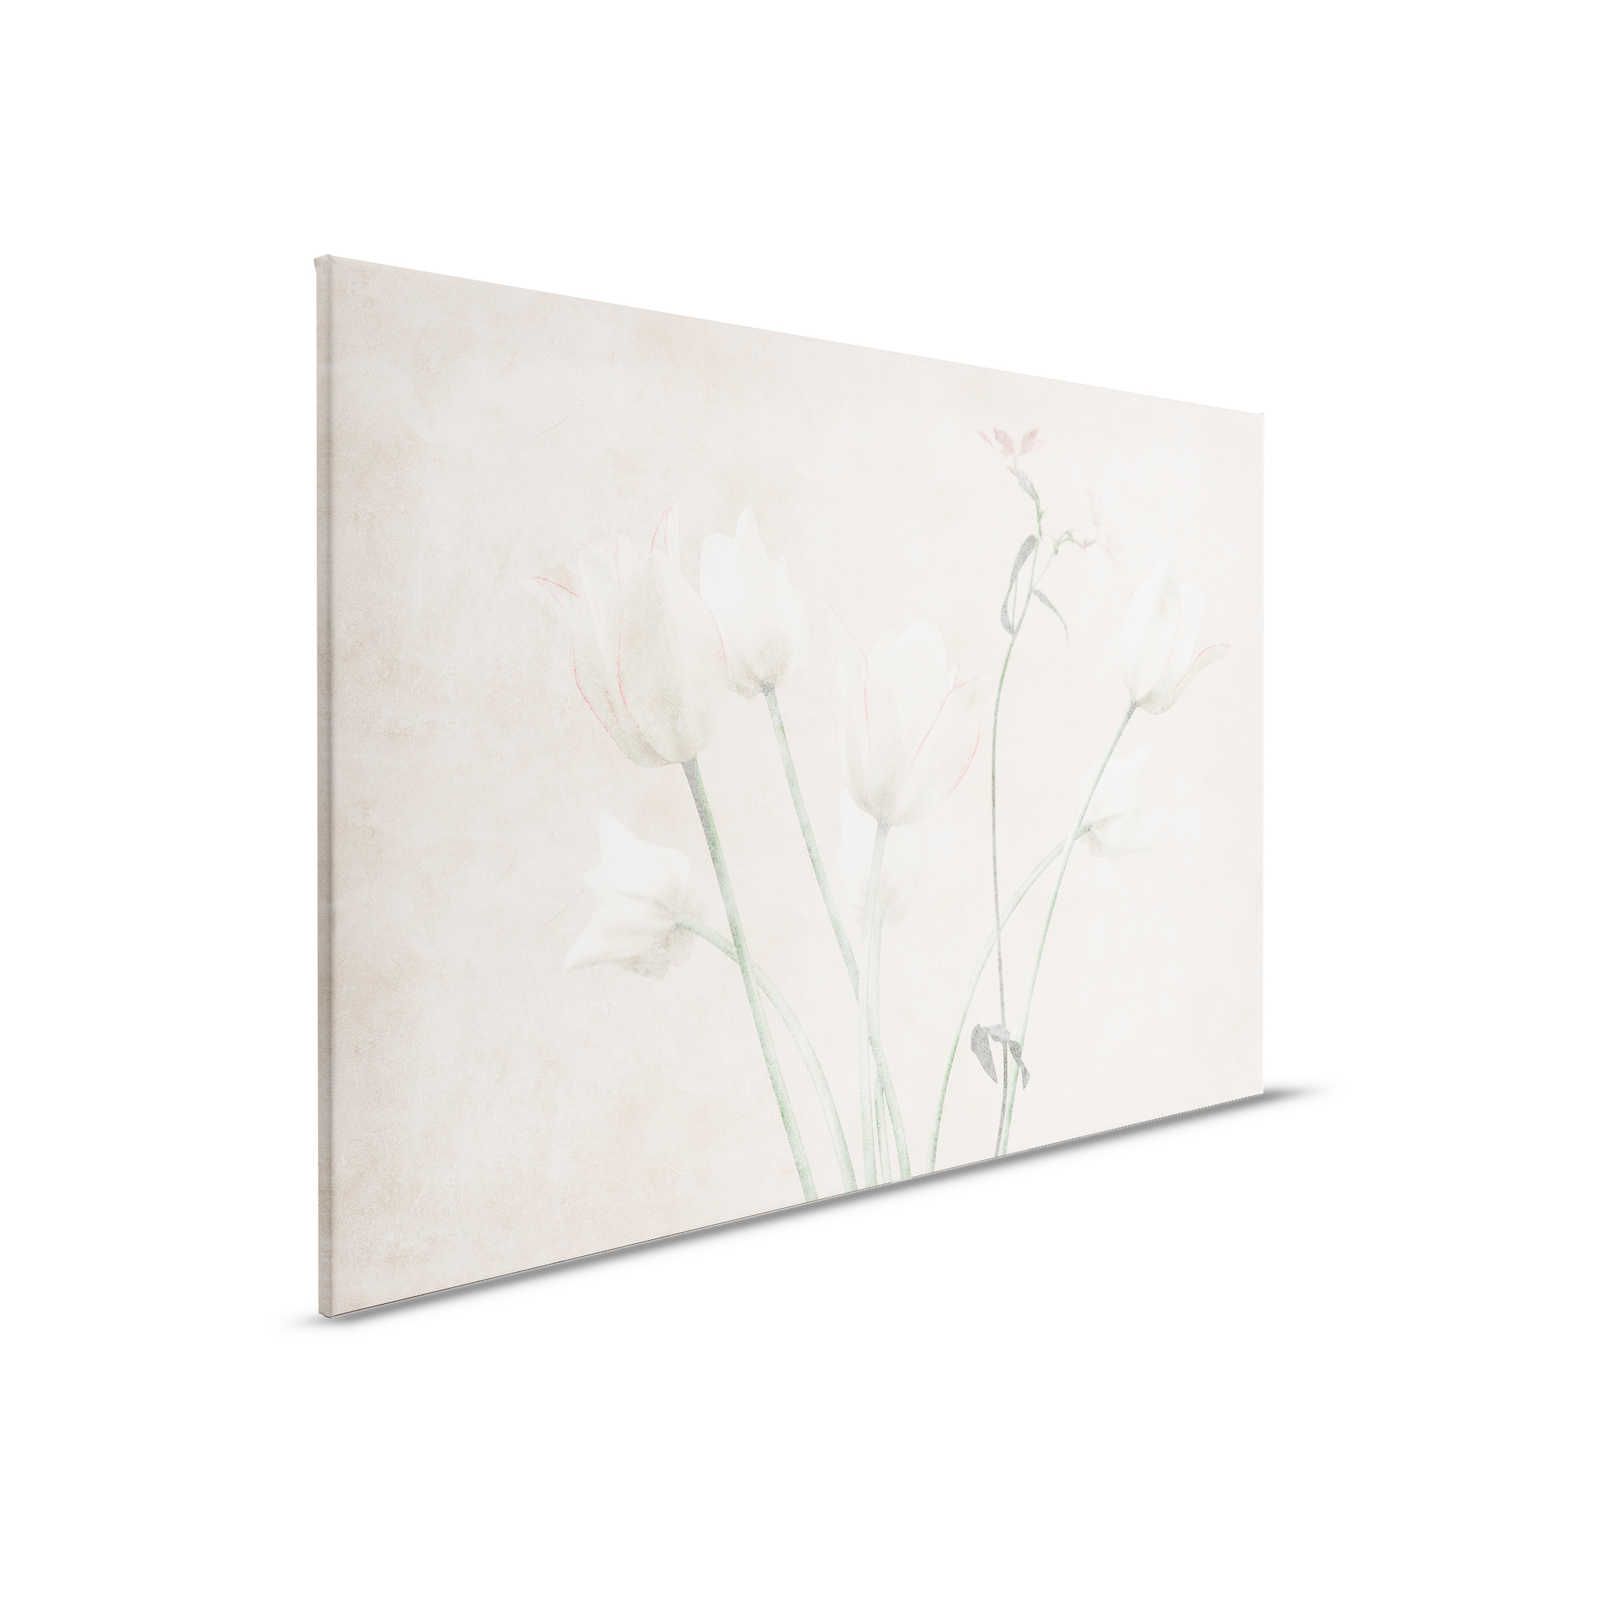 Morning Room 3 - Flowers Canvas Painting Faded Style Tulips - 0.90 m x 0.60 m
